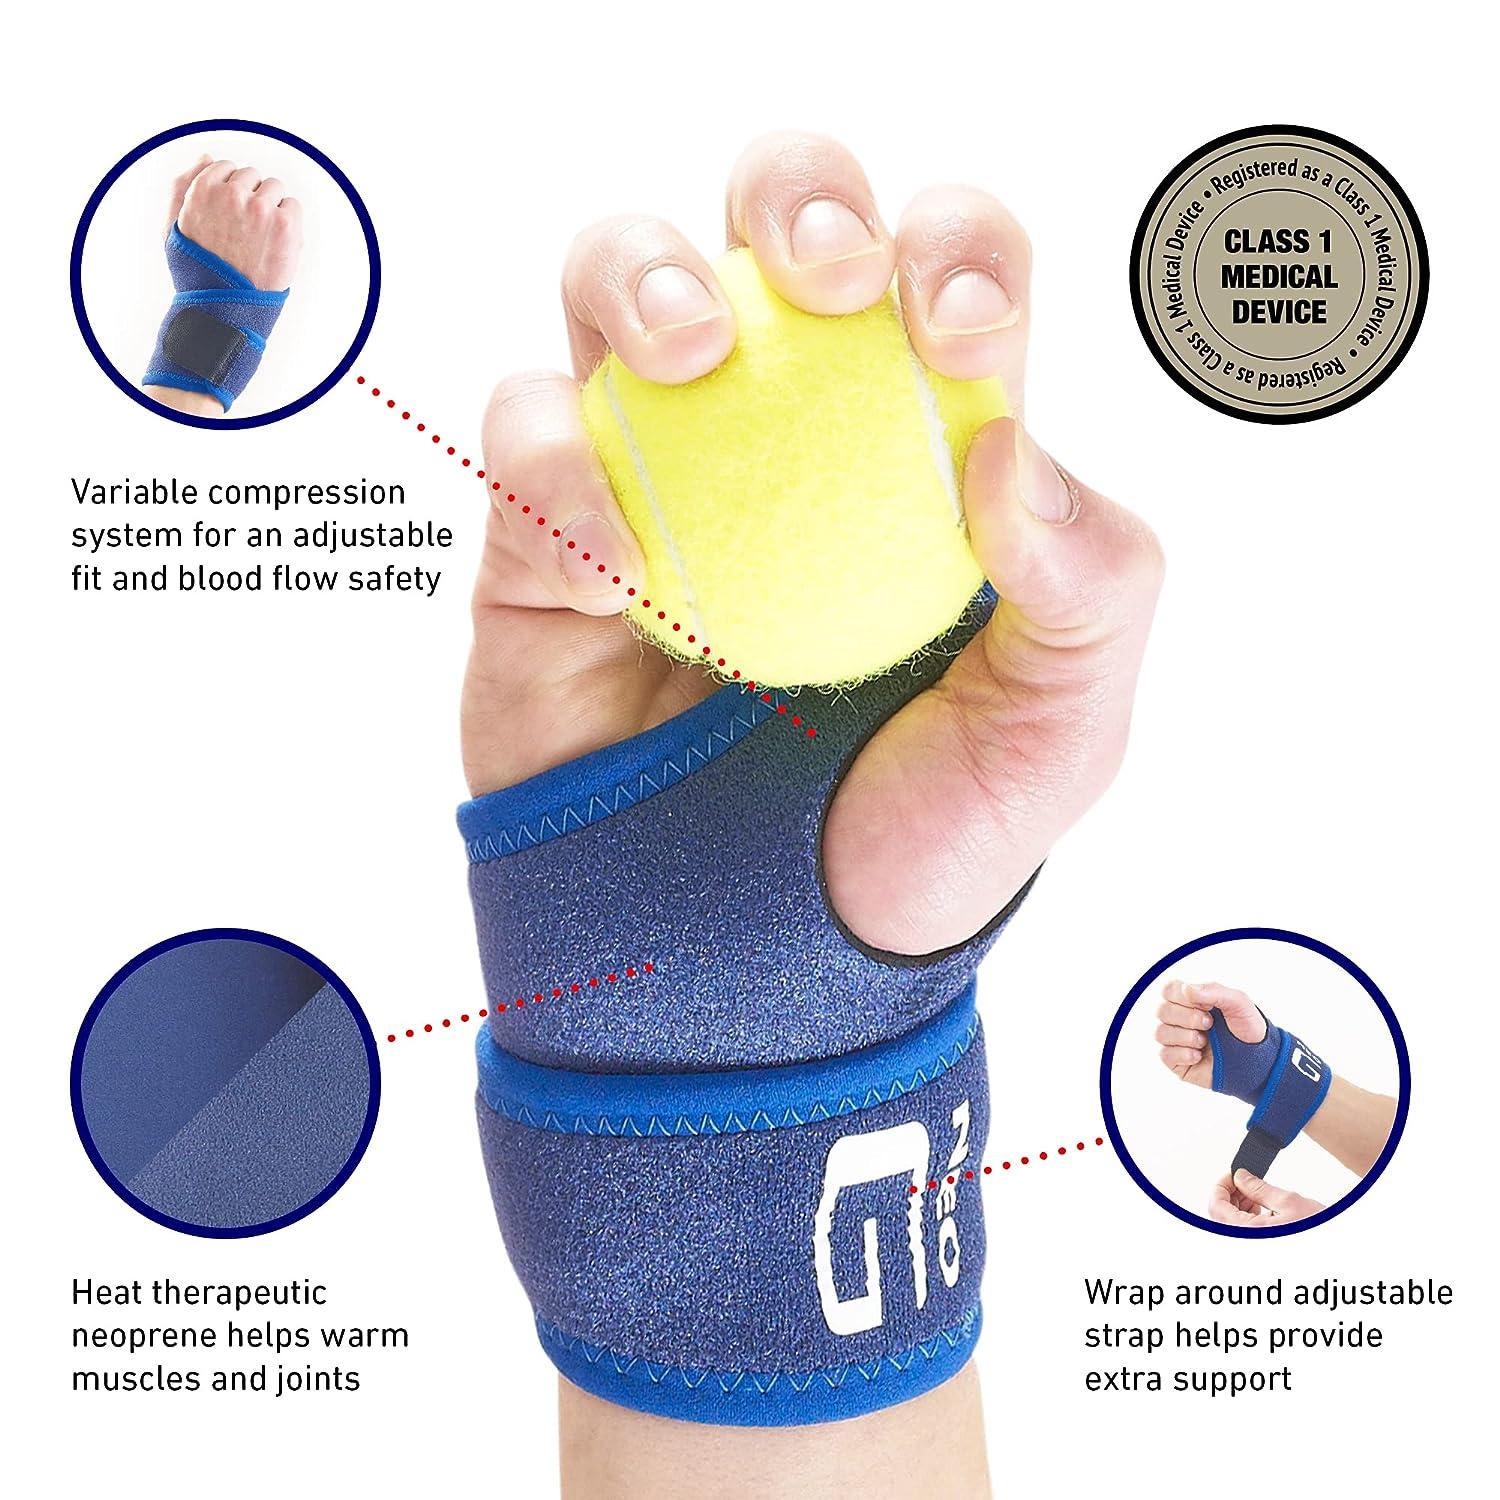  Neo G Wrist and Thumb Brace, Stabilized - Spica